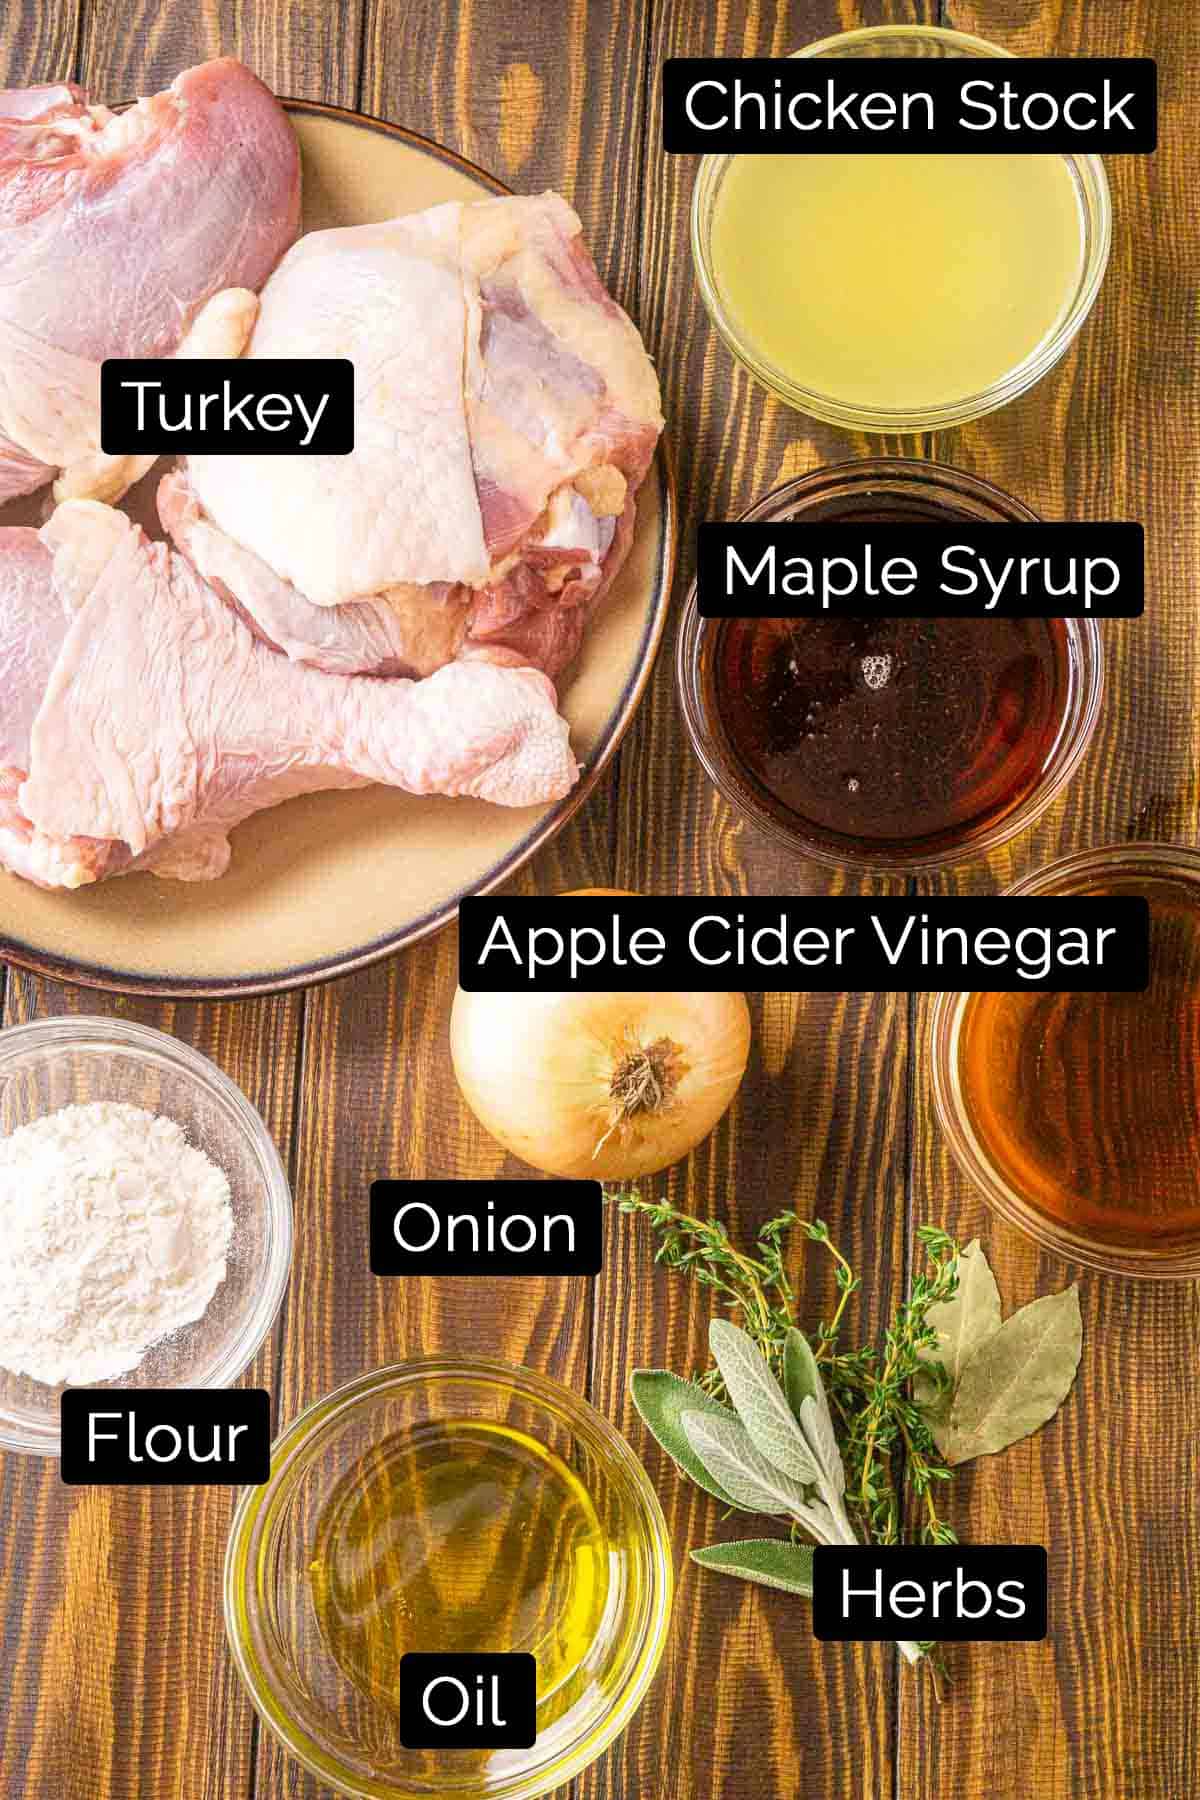 The braised turkey leg ingredients with black and white labels on a board.